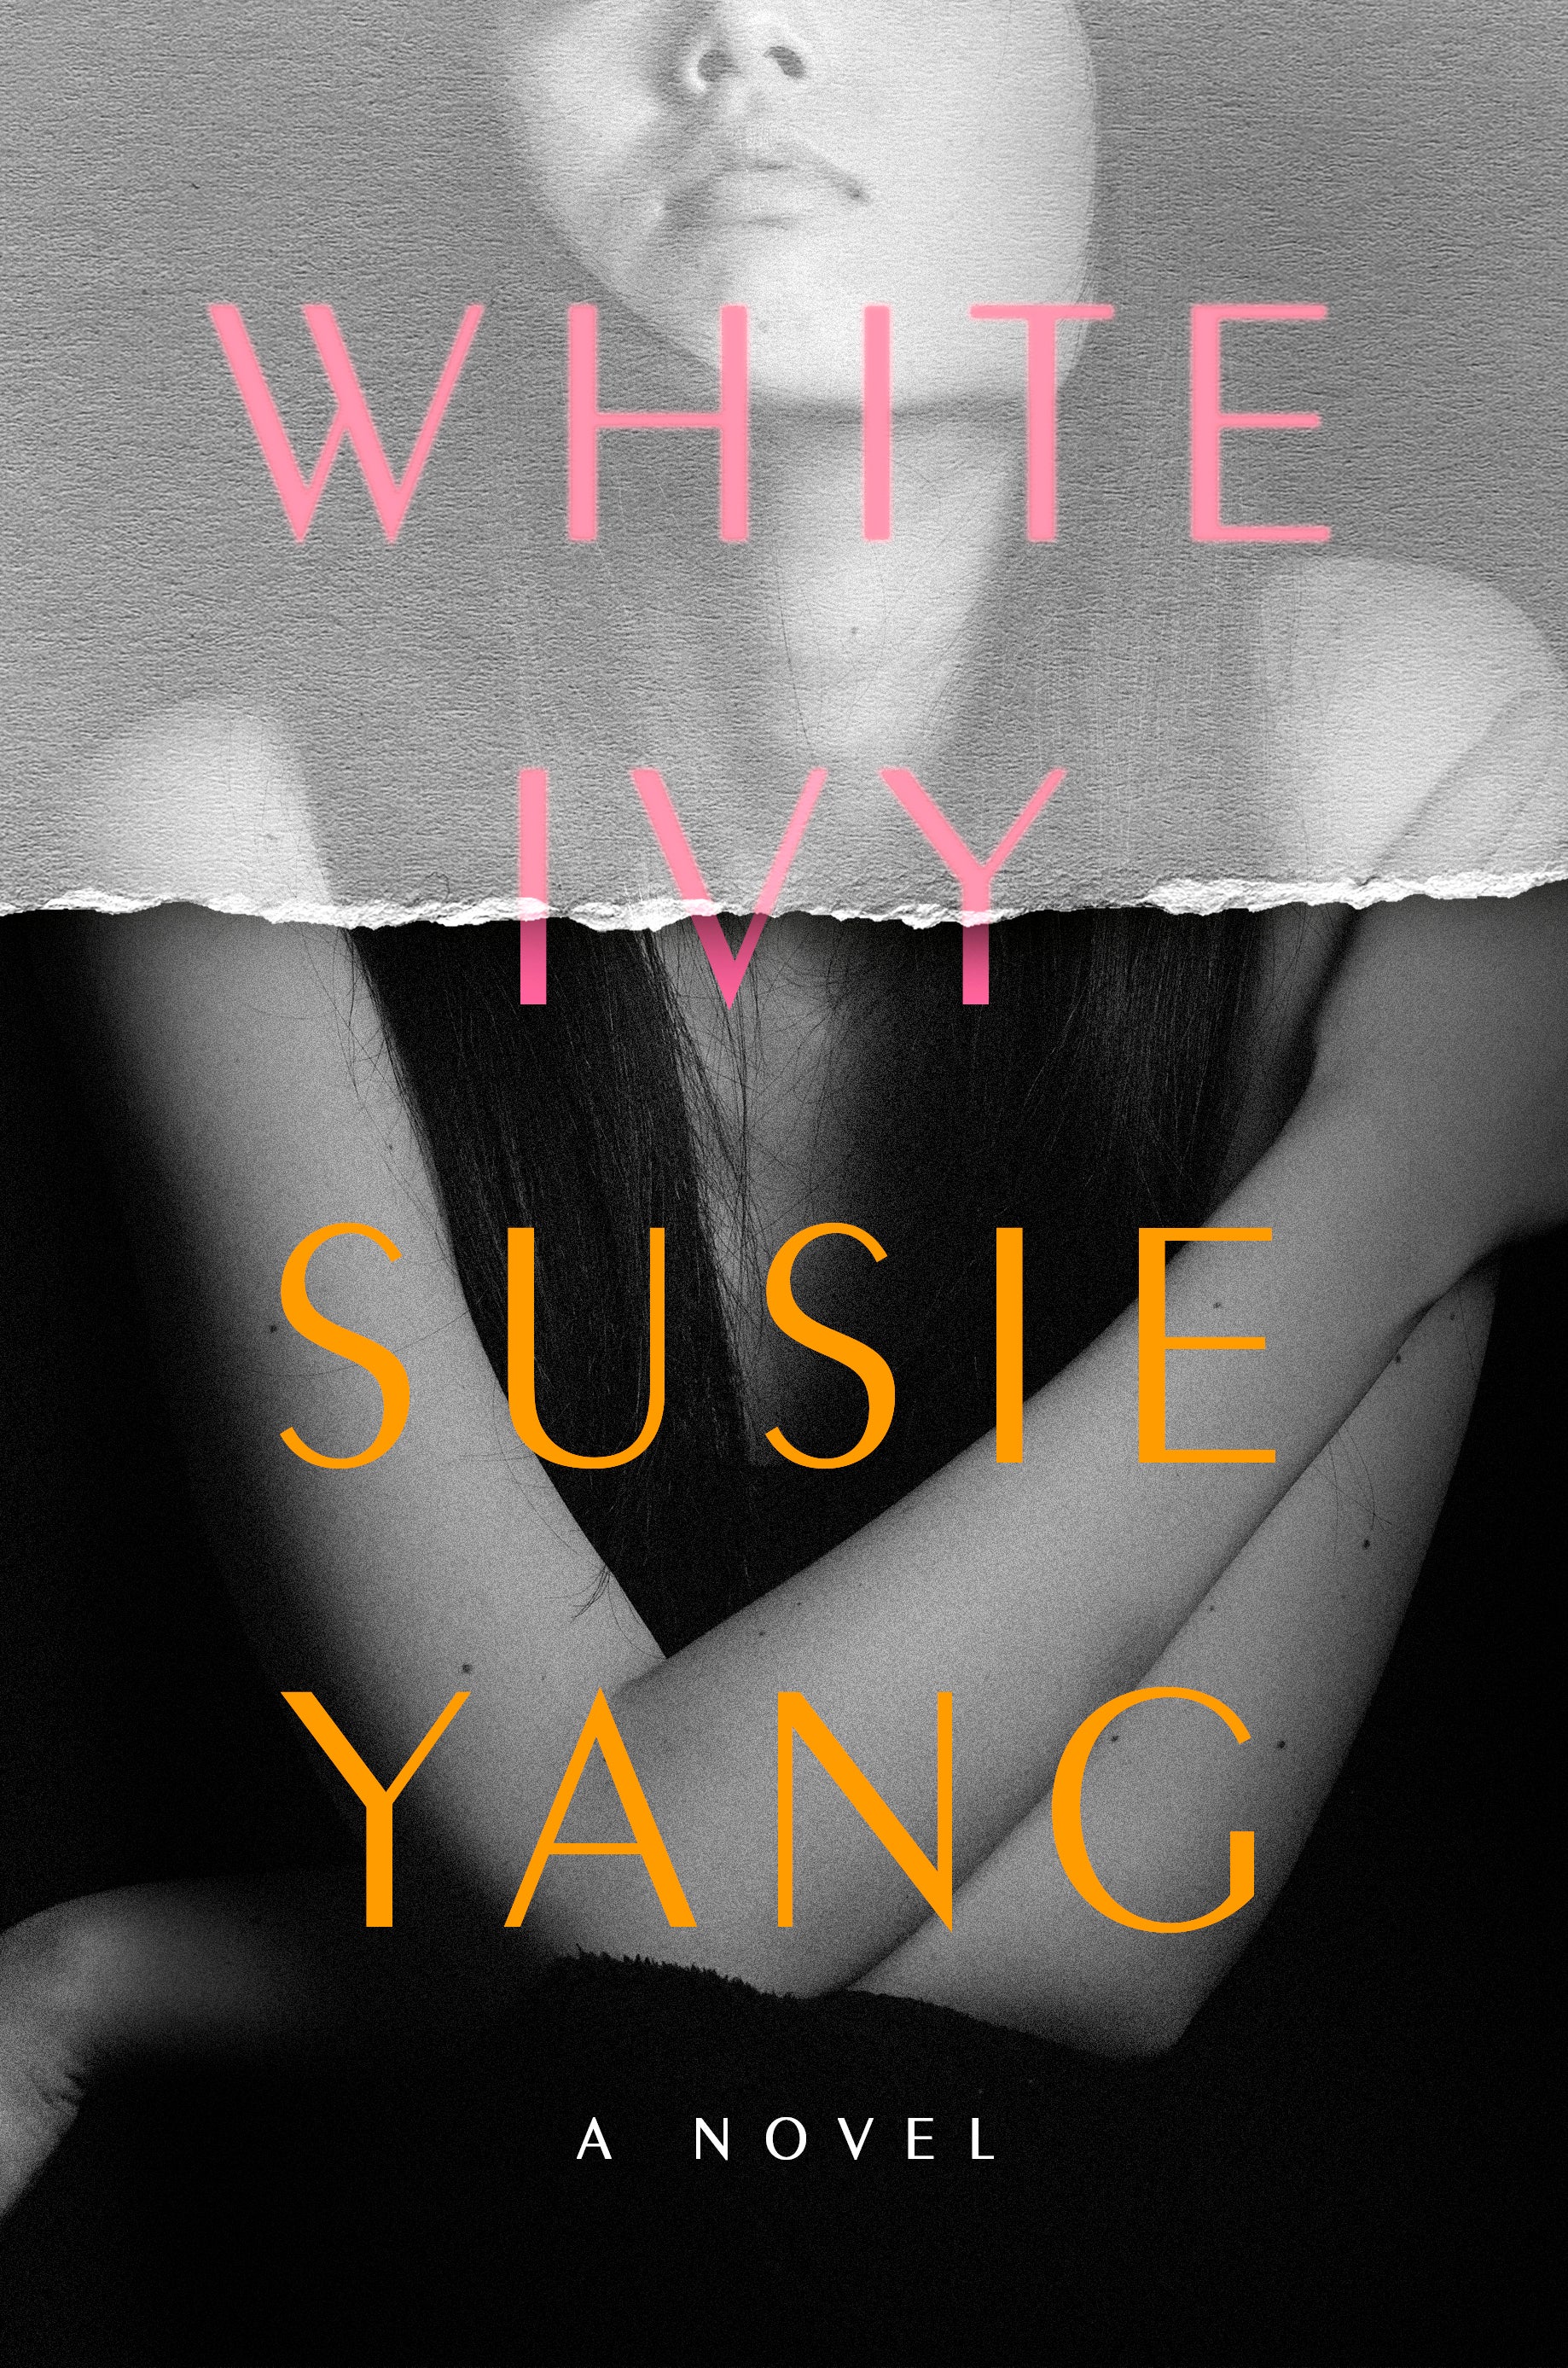 Book Review - White Ivy